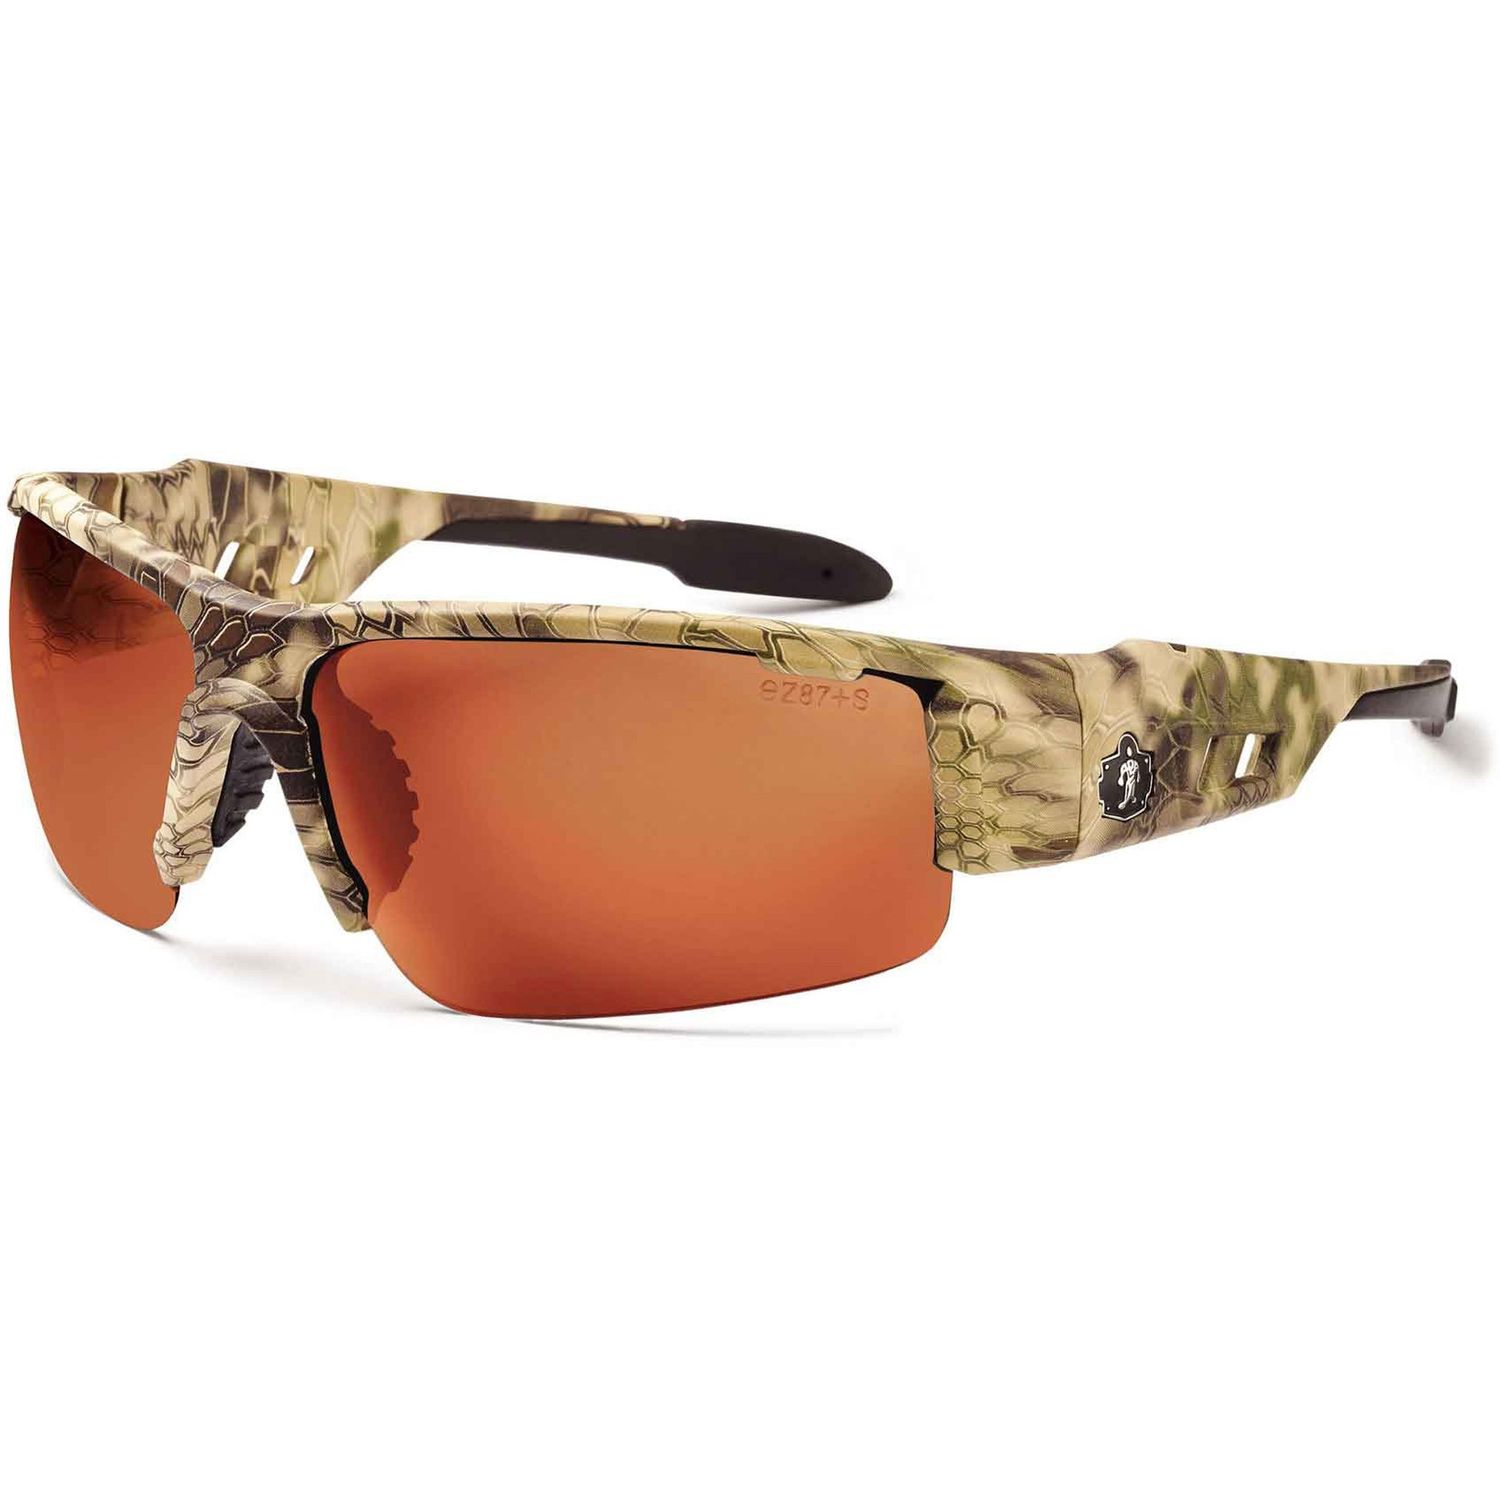 Dagr PZ Copper Safety Glasses Recommended for: Sport, Shooting, Boating, Hunting, Fishing, Skiing, Construction, Landscaping, Carpentry